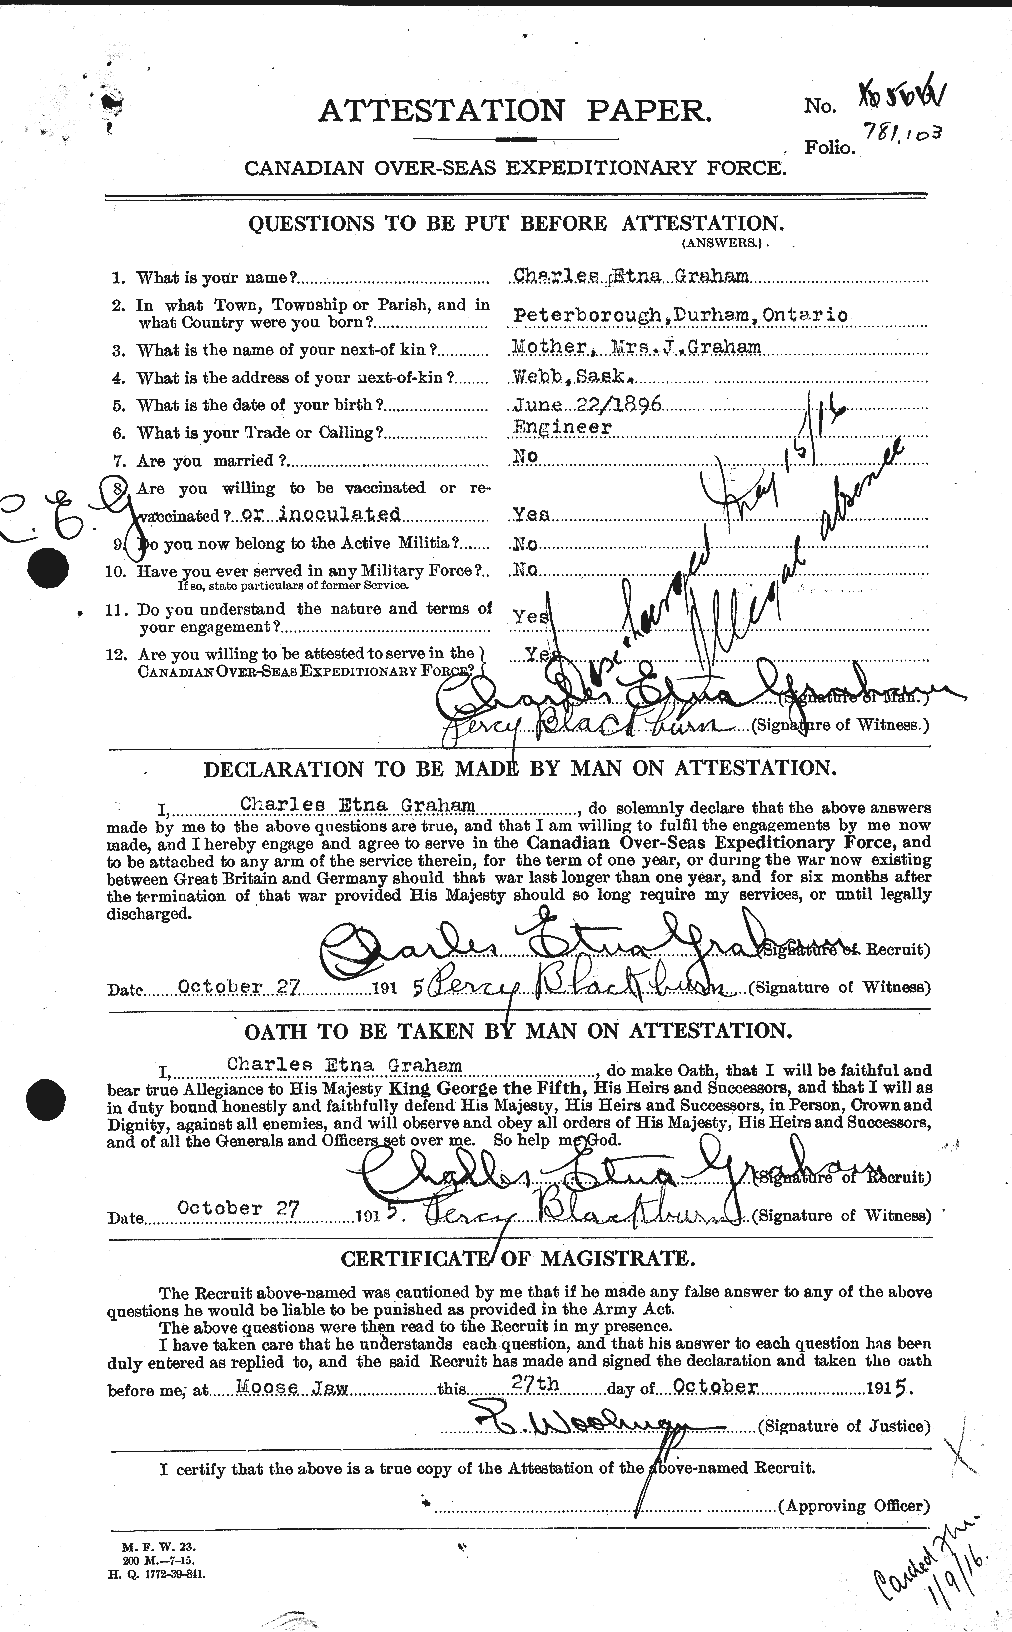 Personnel Records of the First World War - CEF 359711a